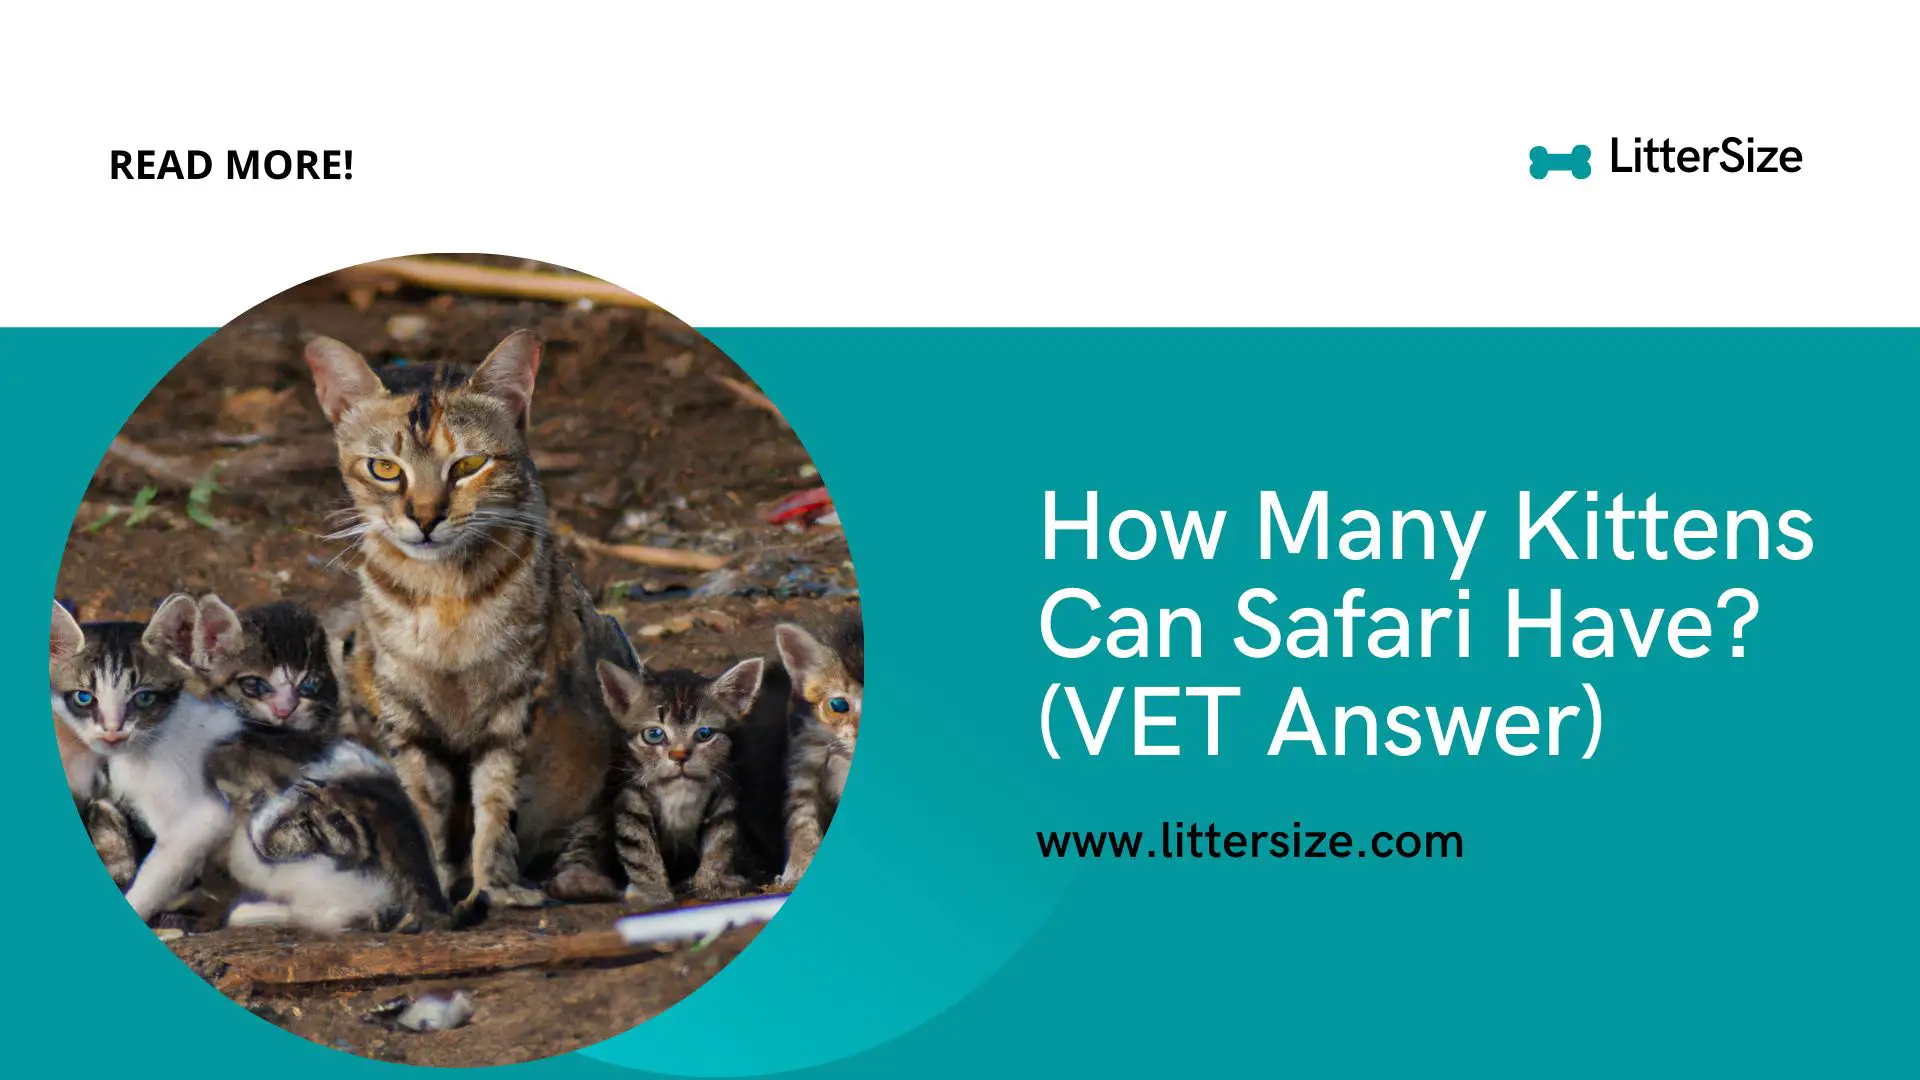 How Many Kittens Can Safari Have? (VET Answer)